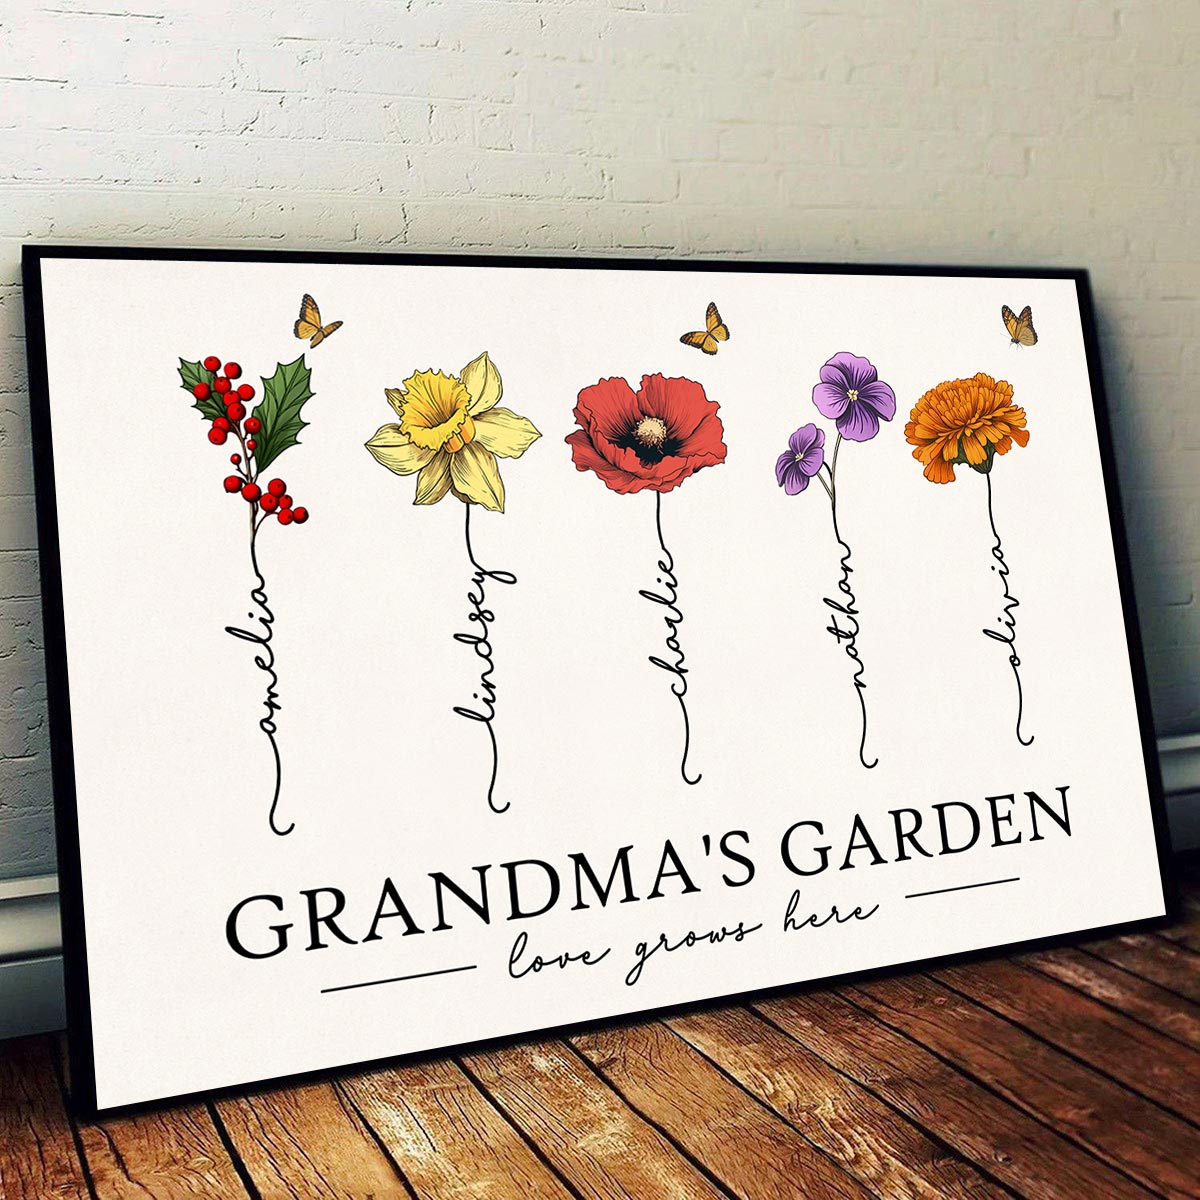 Grandma‘s Garden Love Grows Here Beautiful Birth Month Flowers Gift For Grandma Mom Personalized Poster